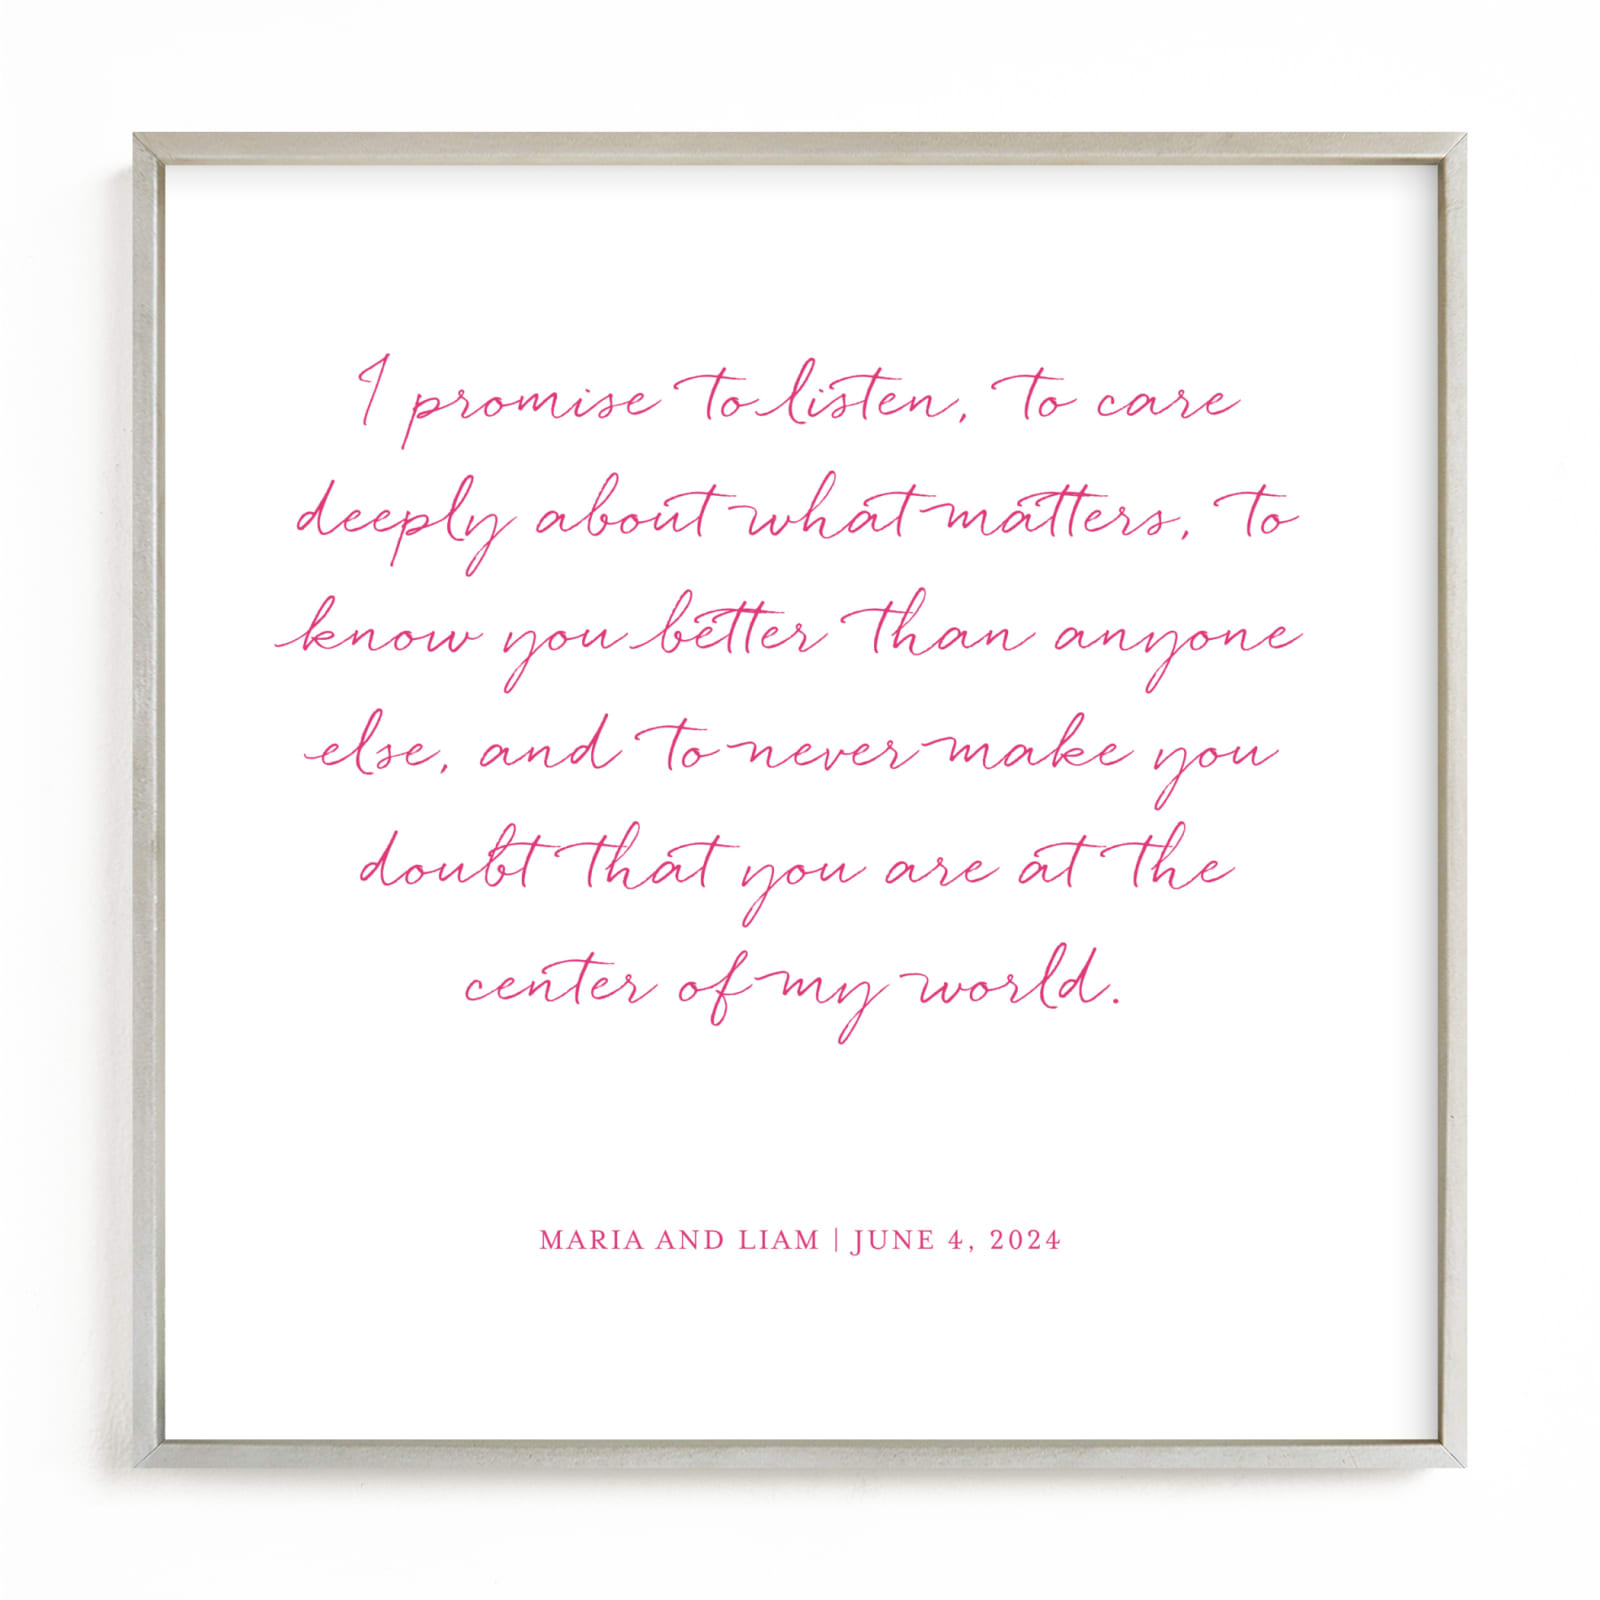 This is a pink photos to art by Minted called Your Vows as an Art Print.